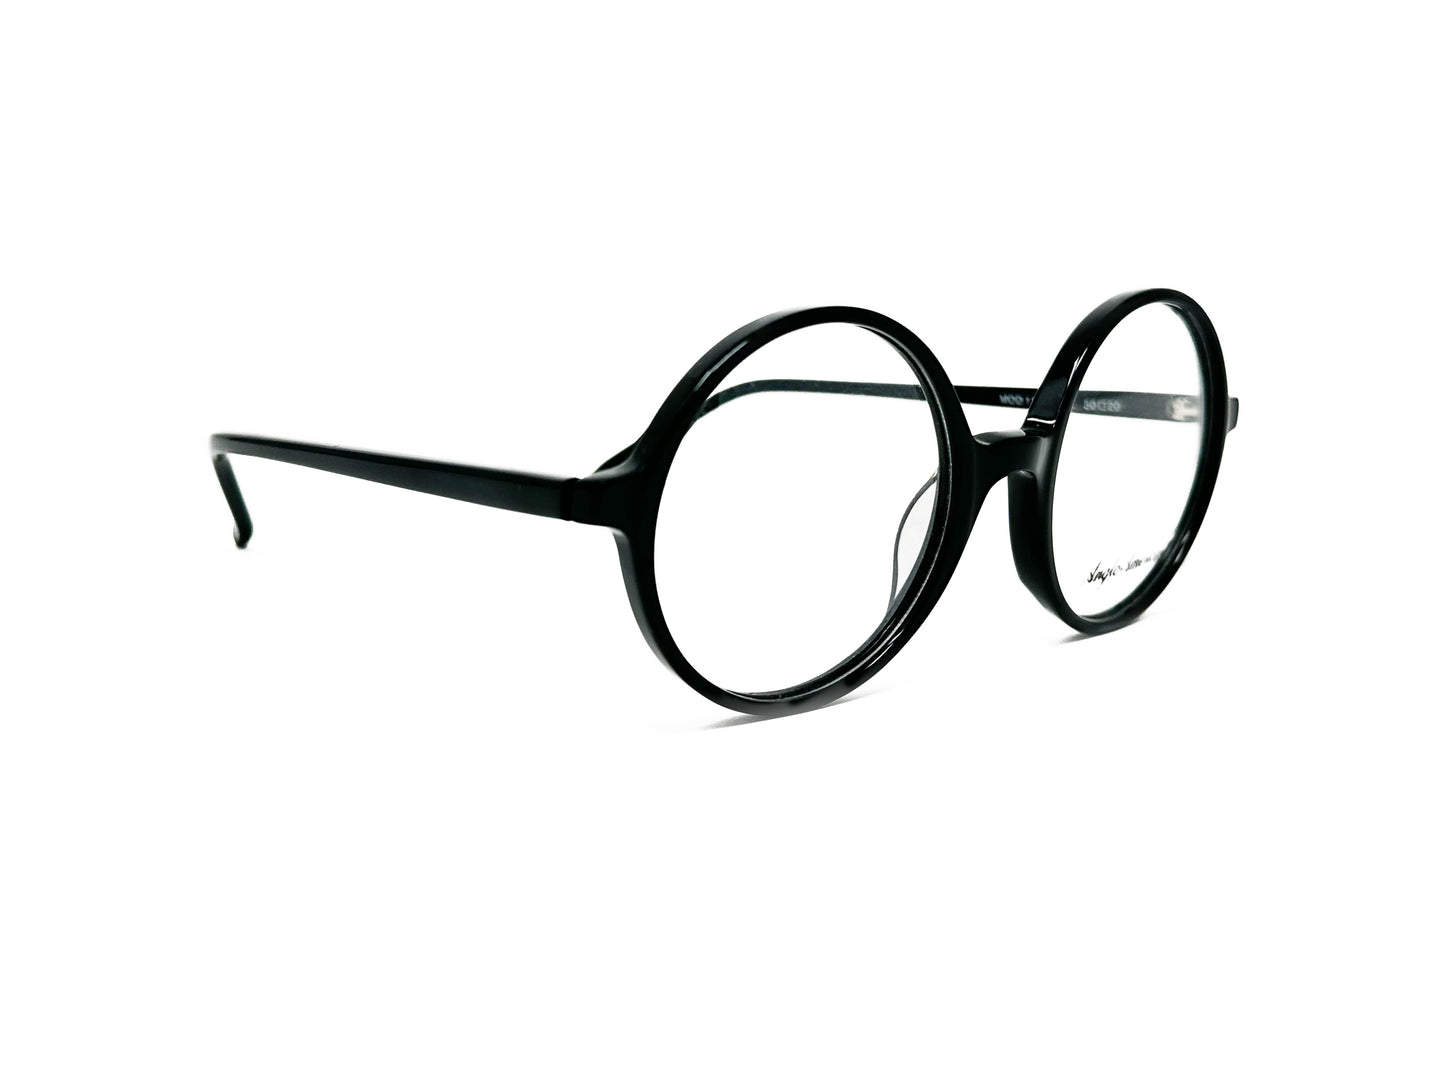 Anglo American Optical round, acetate optical frame. Model: 116. Color: BLK - Black. Side view.